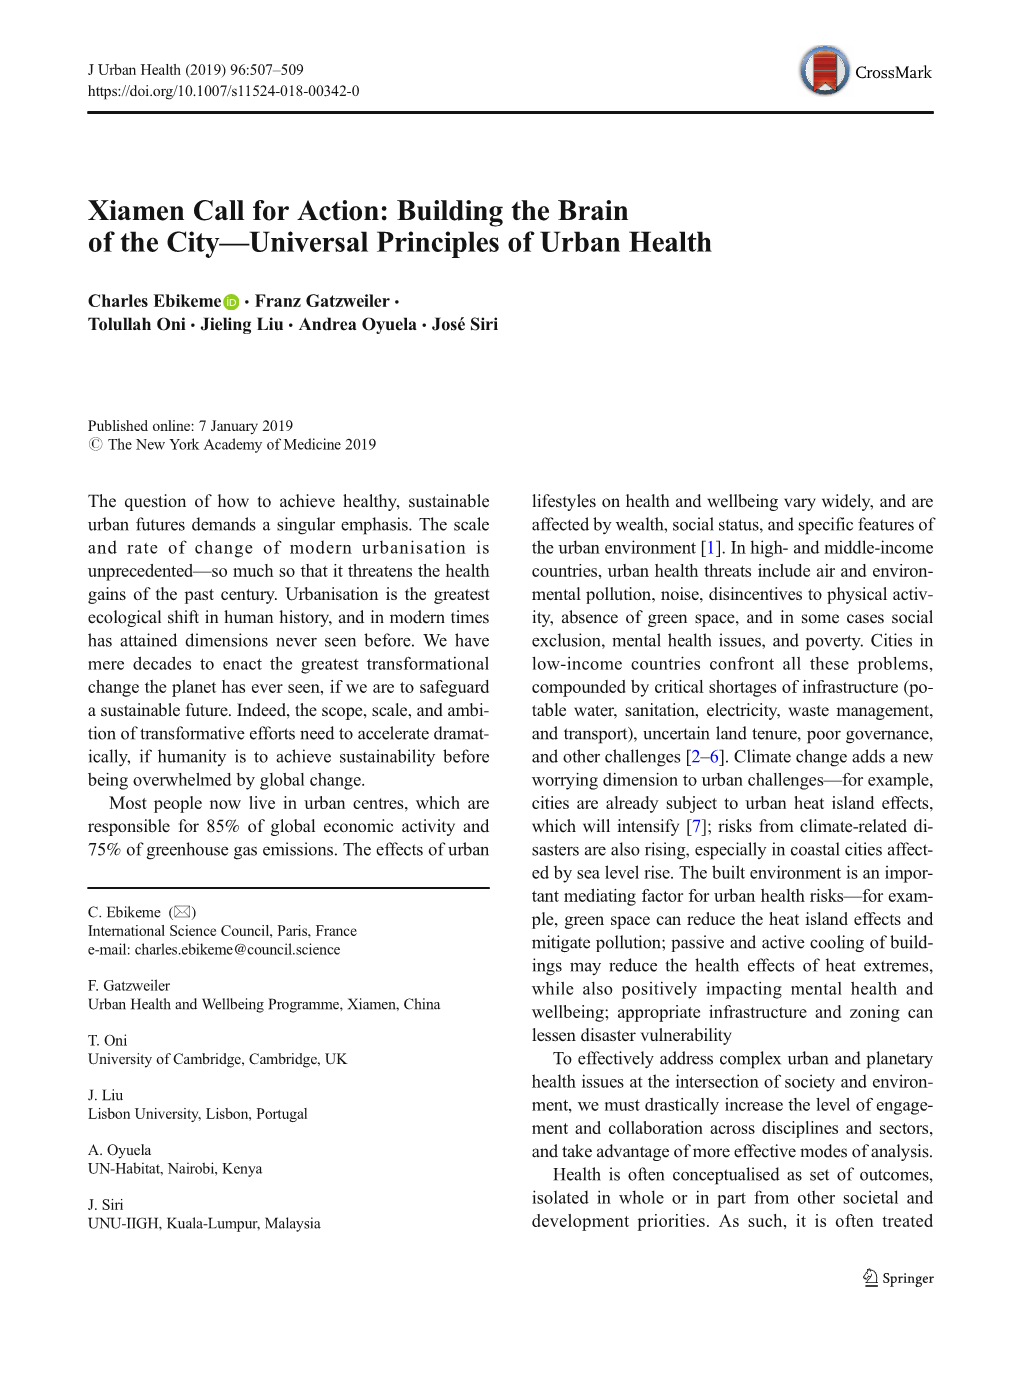 Xiamen Call for Action: Building the Brain of the City—Universal Principles of Urban Health